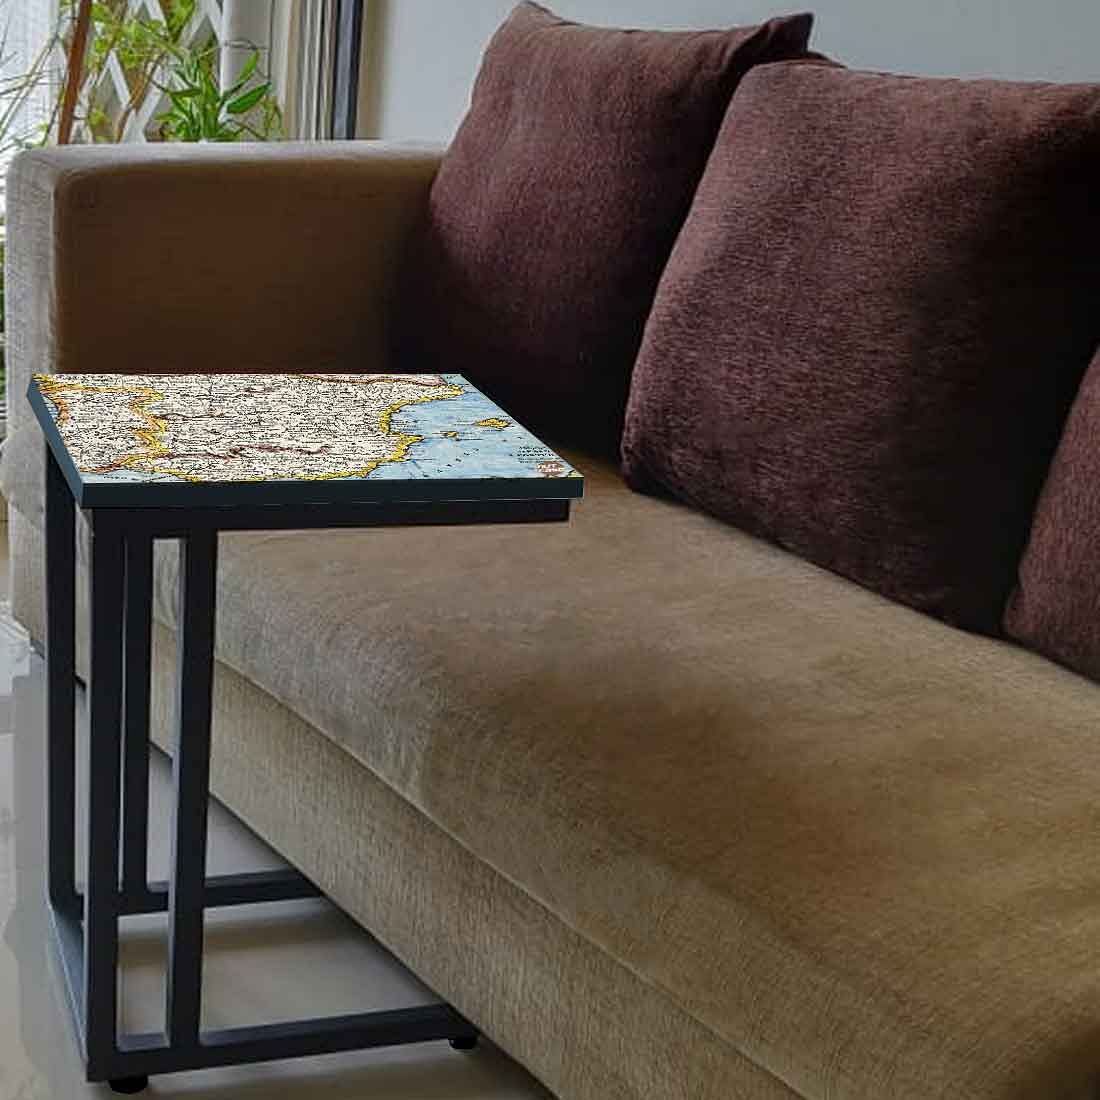 C Shaped End Table For Sofa  - Map Nutcase